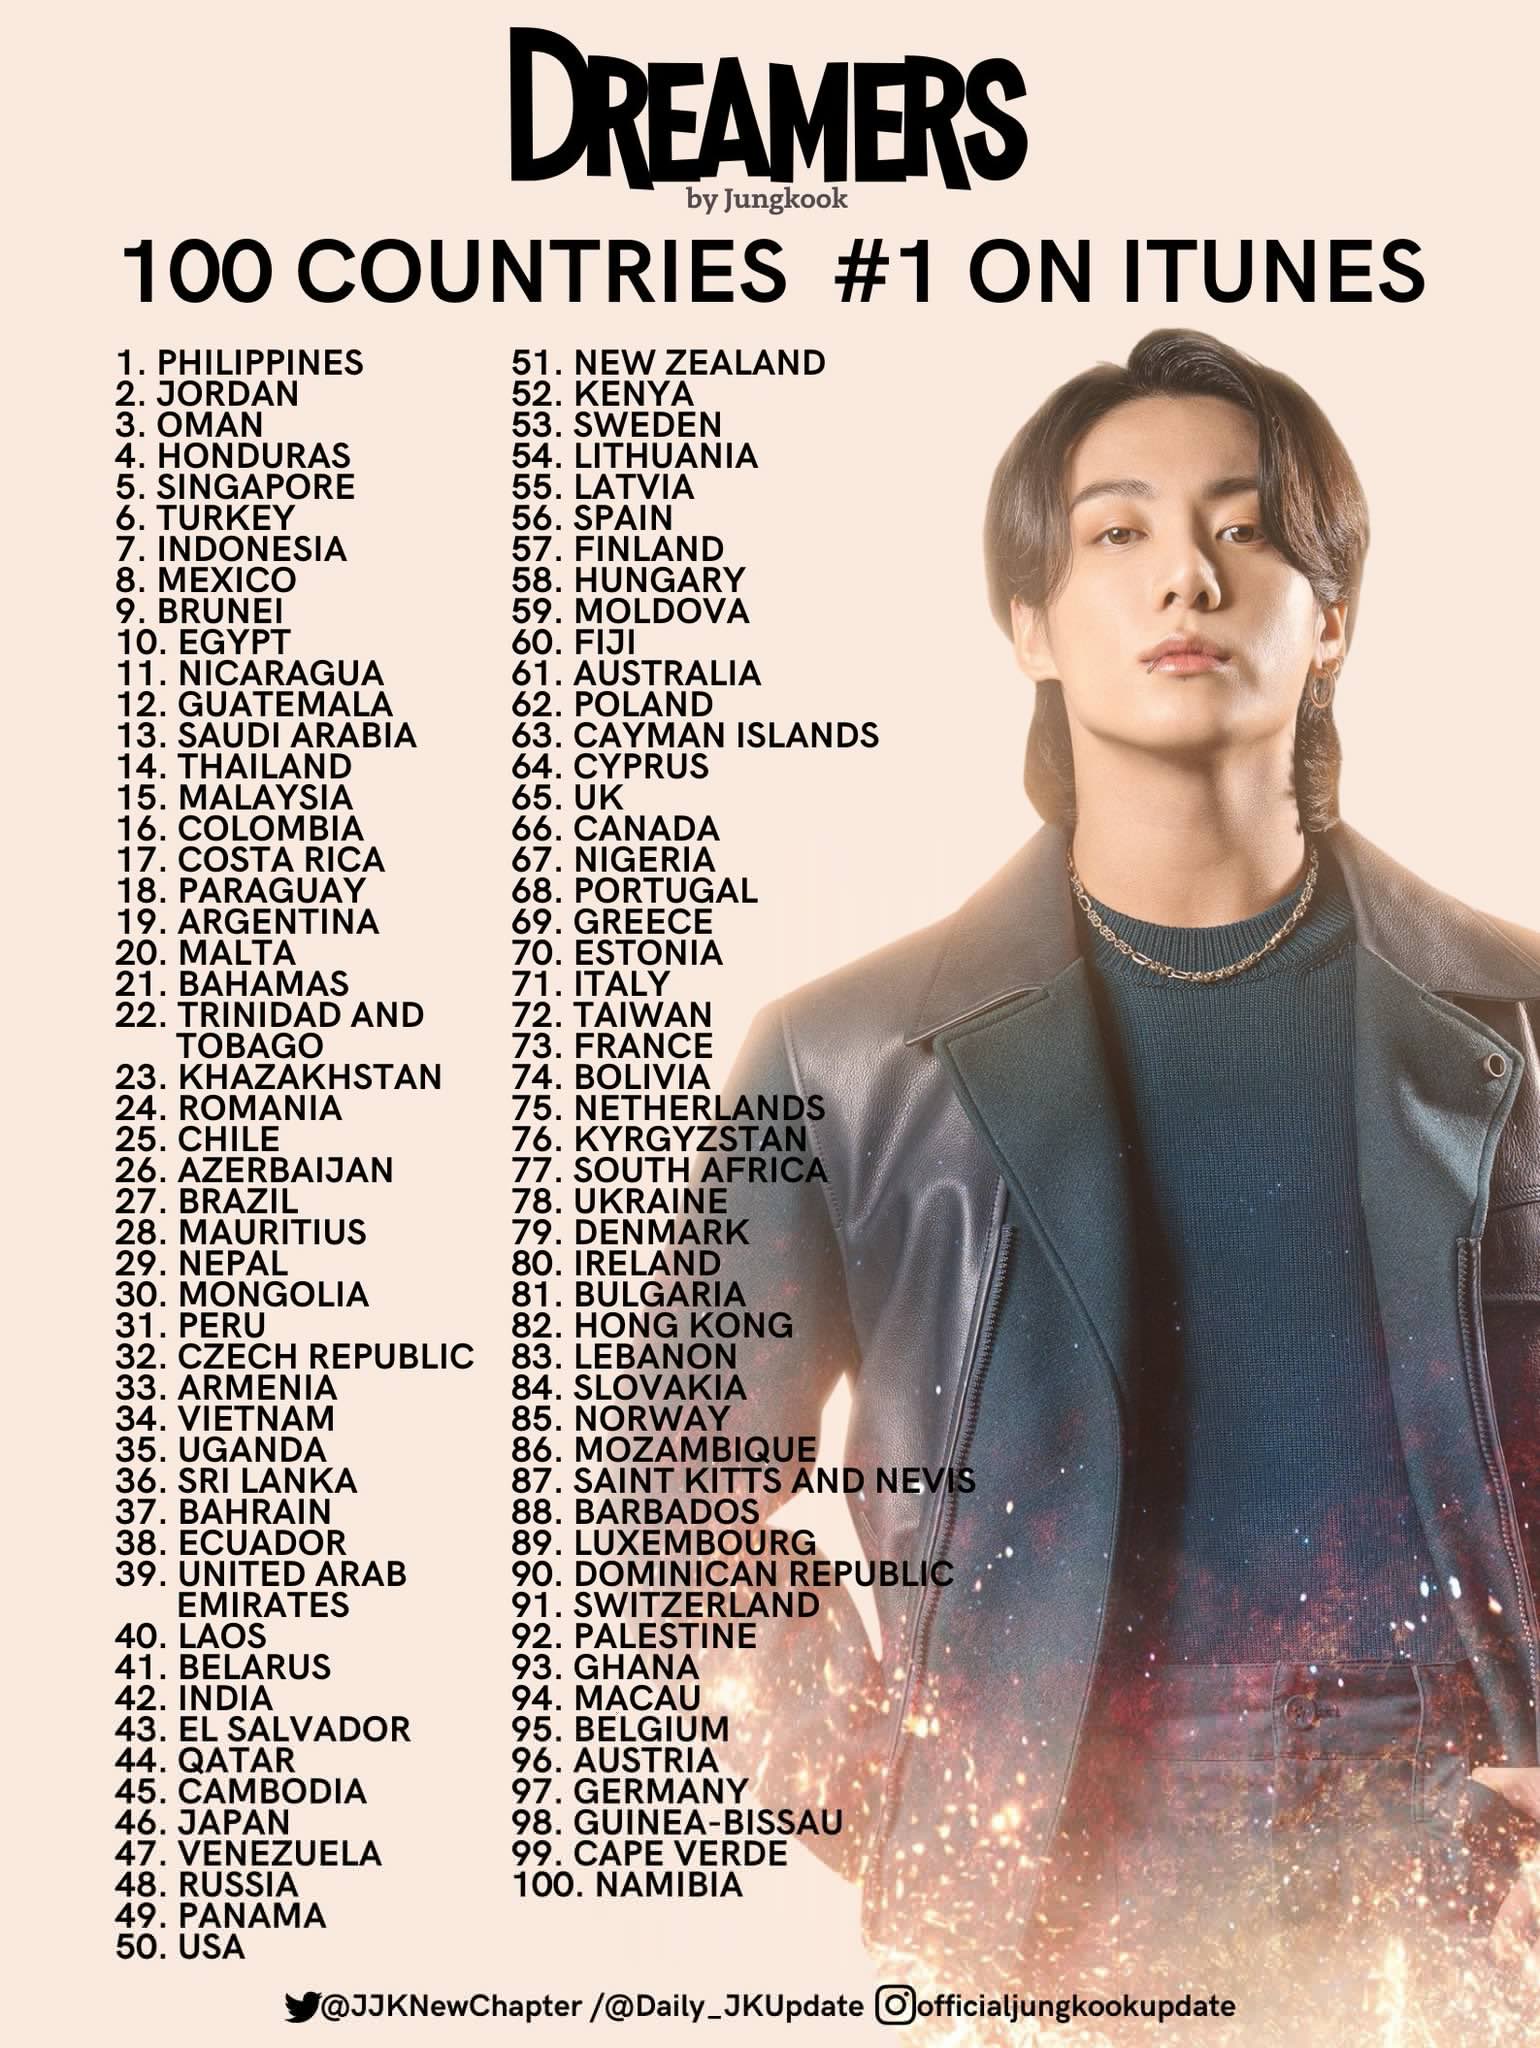 Ondartet cylinder Gennemsigtig World Music Awards on Twitter: "#Jungkook's magic #FIFAWorldCupsong  #Dreamers lands atop the Worldwide, European &amp; US iTunes charts after  topping iTunes in 100 countries in less than 12 hours! It's the 1st #